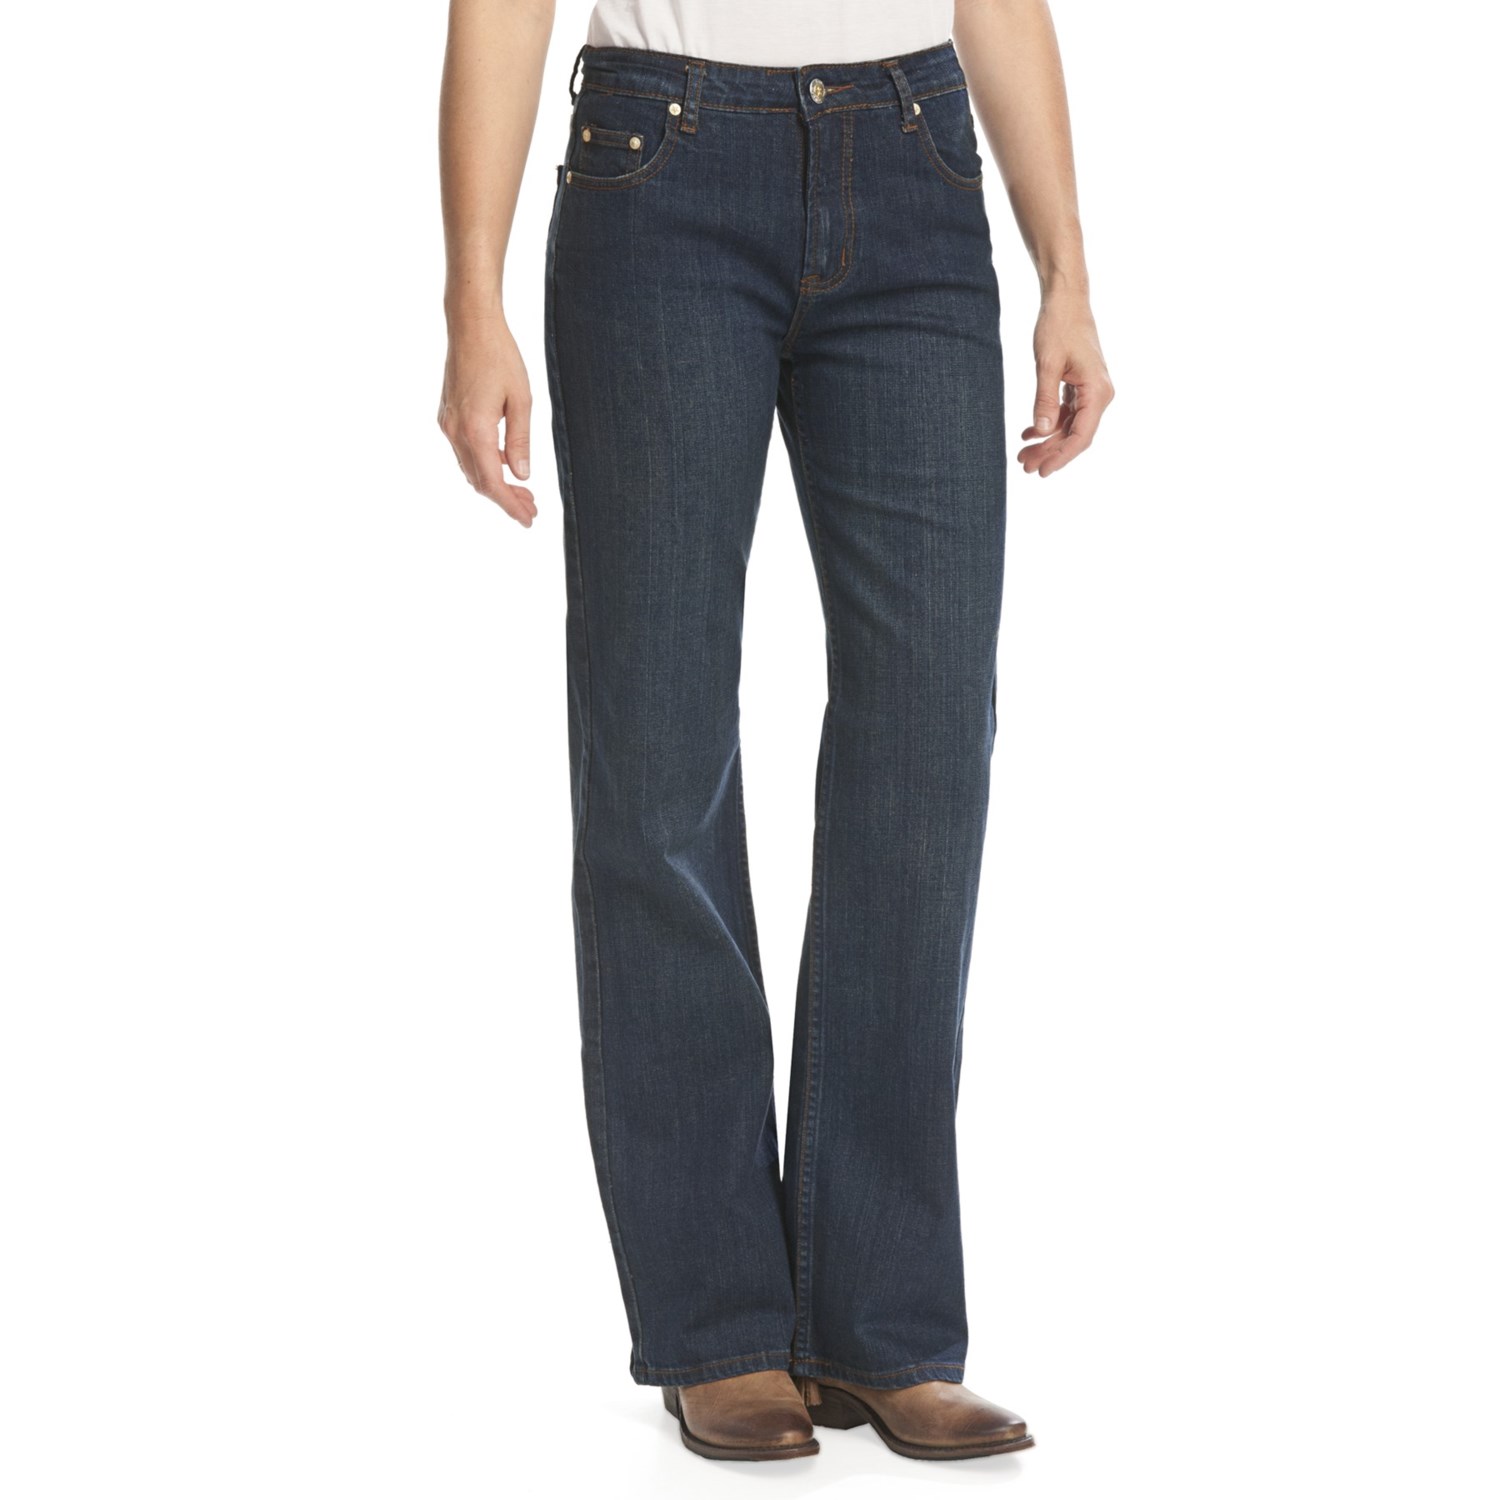 Lawman Spirit Bootcut Jeans - Mid Rise, Slim Fit (For Women) - Save 66%